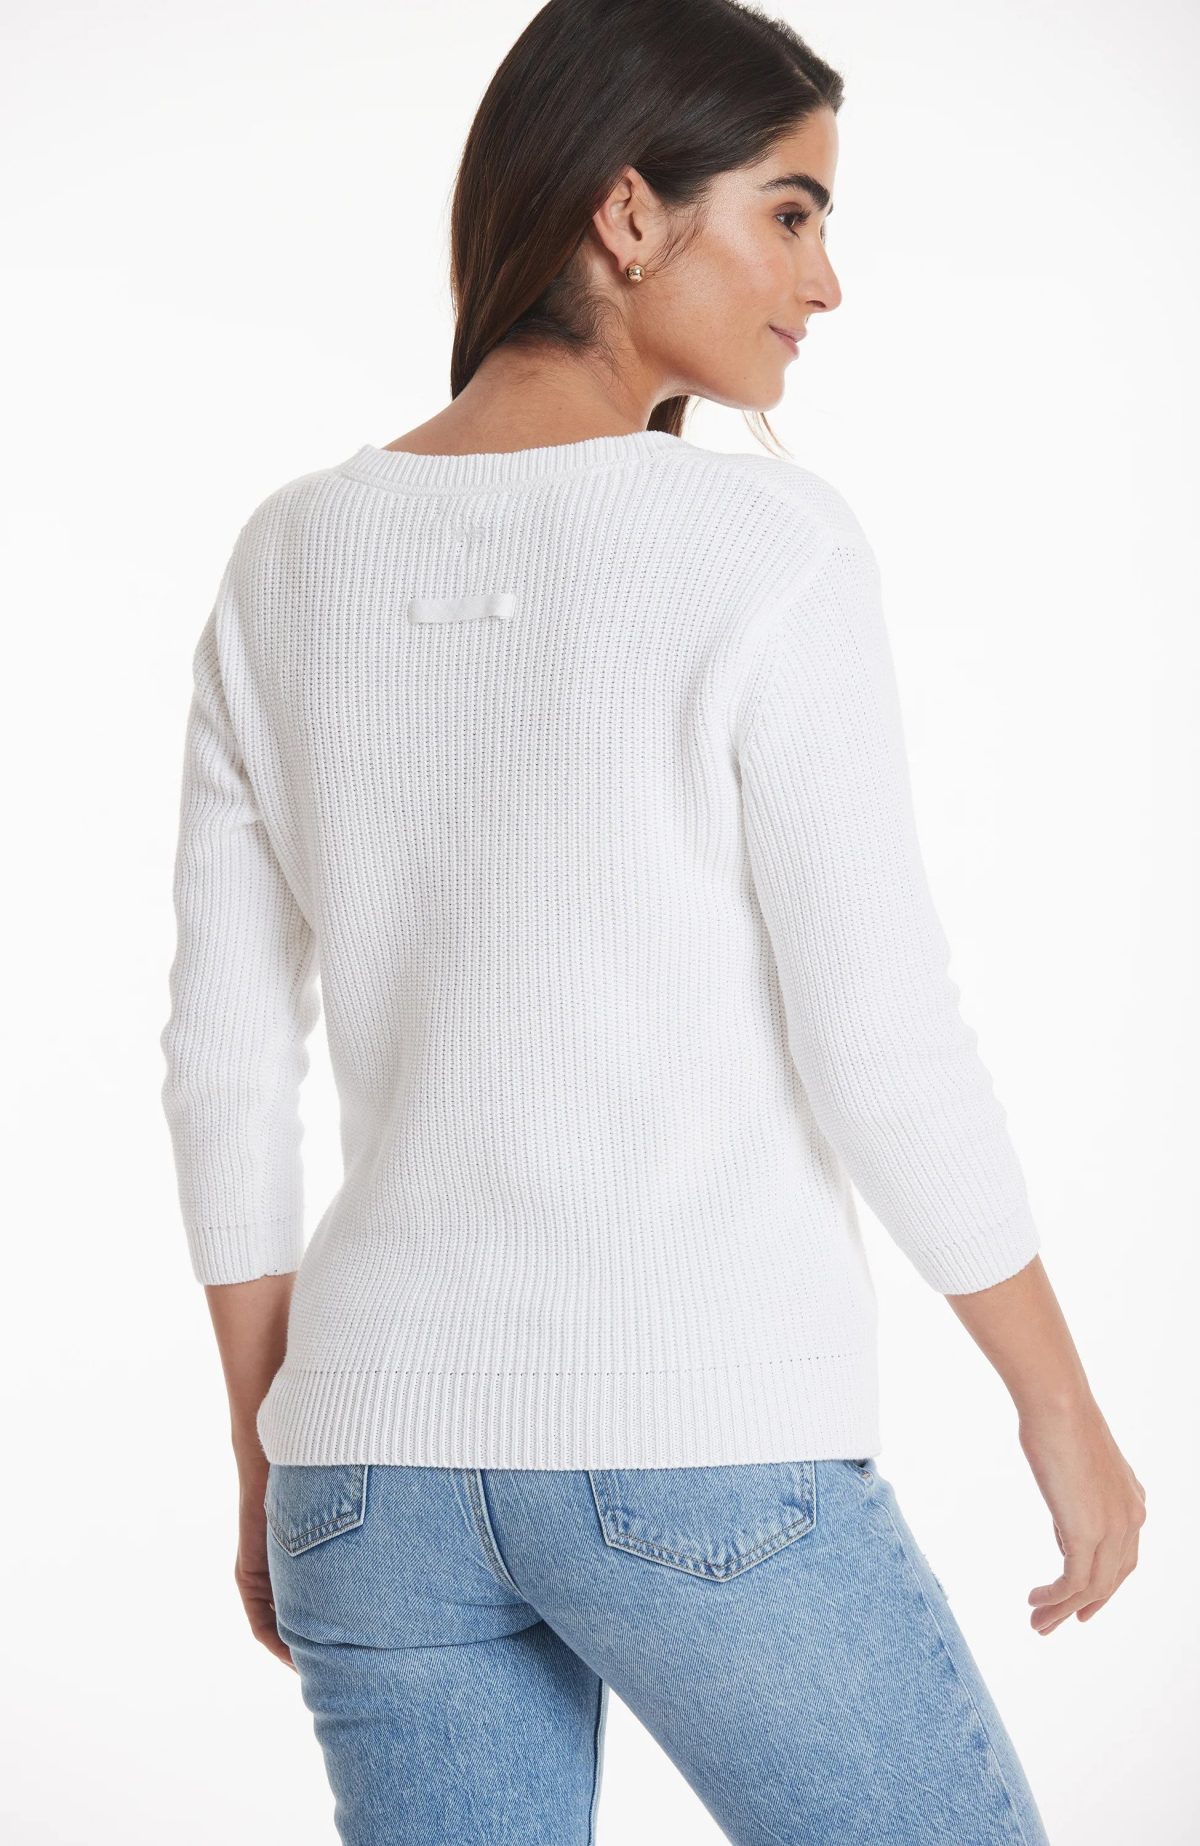 Tyler Boe 22002 White Mineral Wash Shaker Sweater | Ooh Ooh Shoes women's clothing and shoe boutique located in Naples and Mashpee